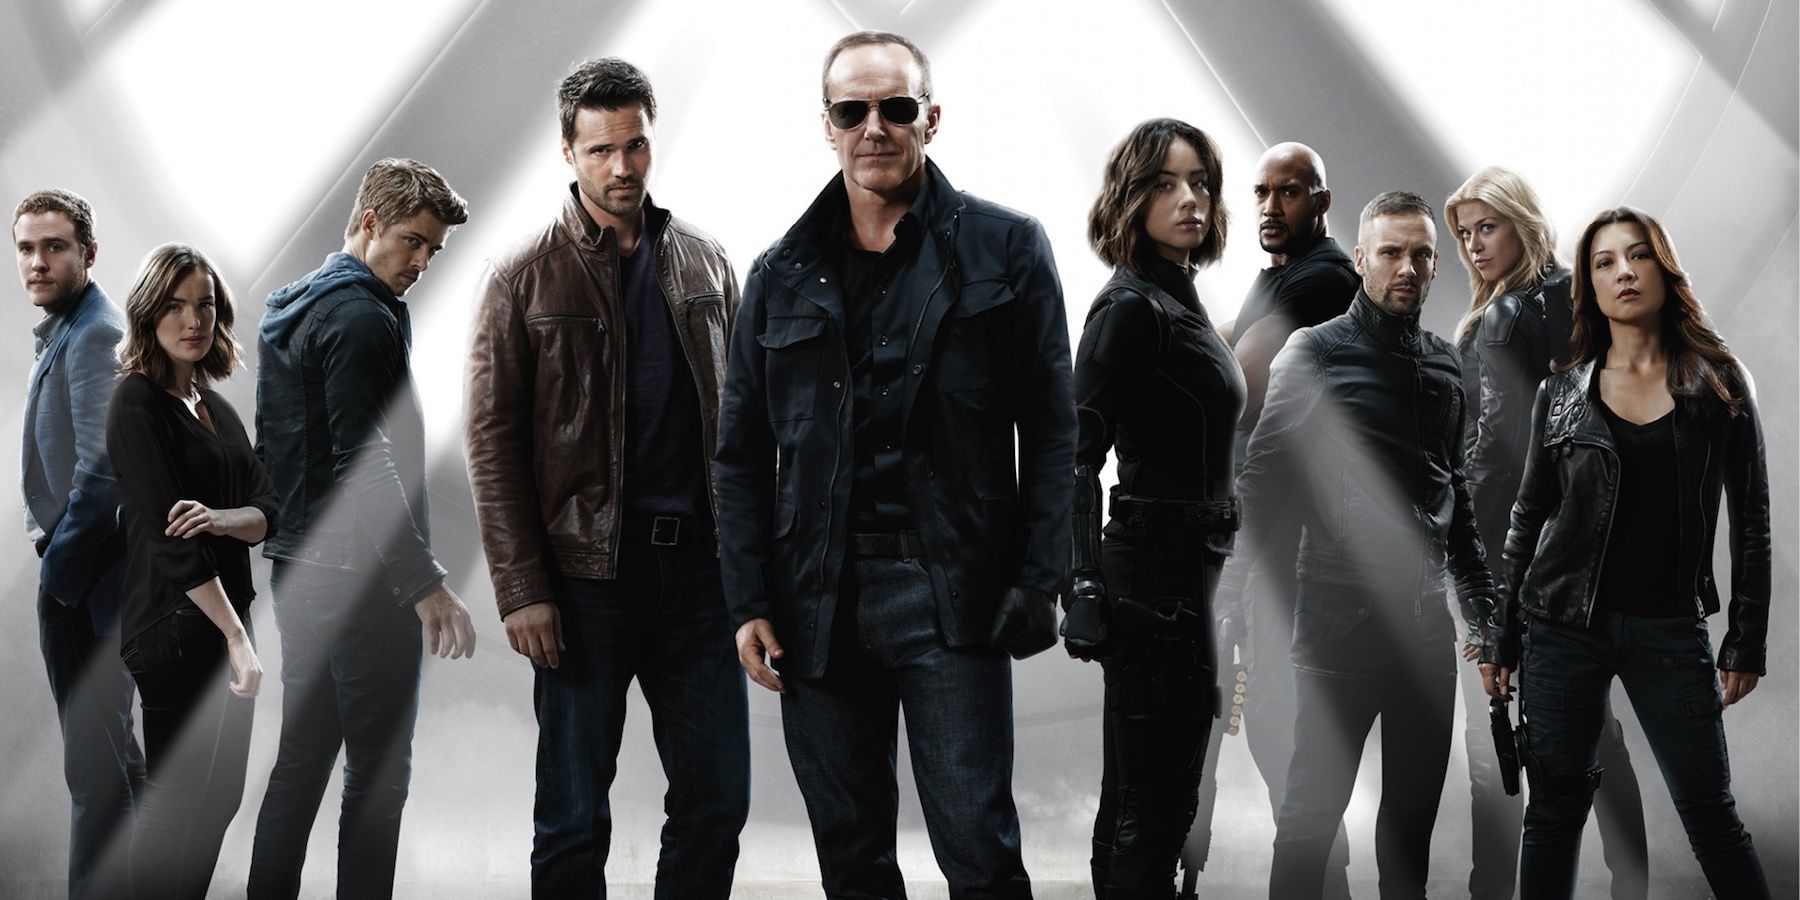 Agents of SHIELD Season 3 Cast Poster